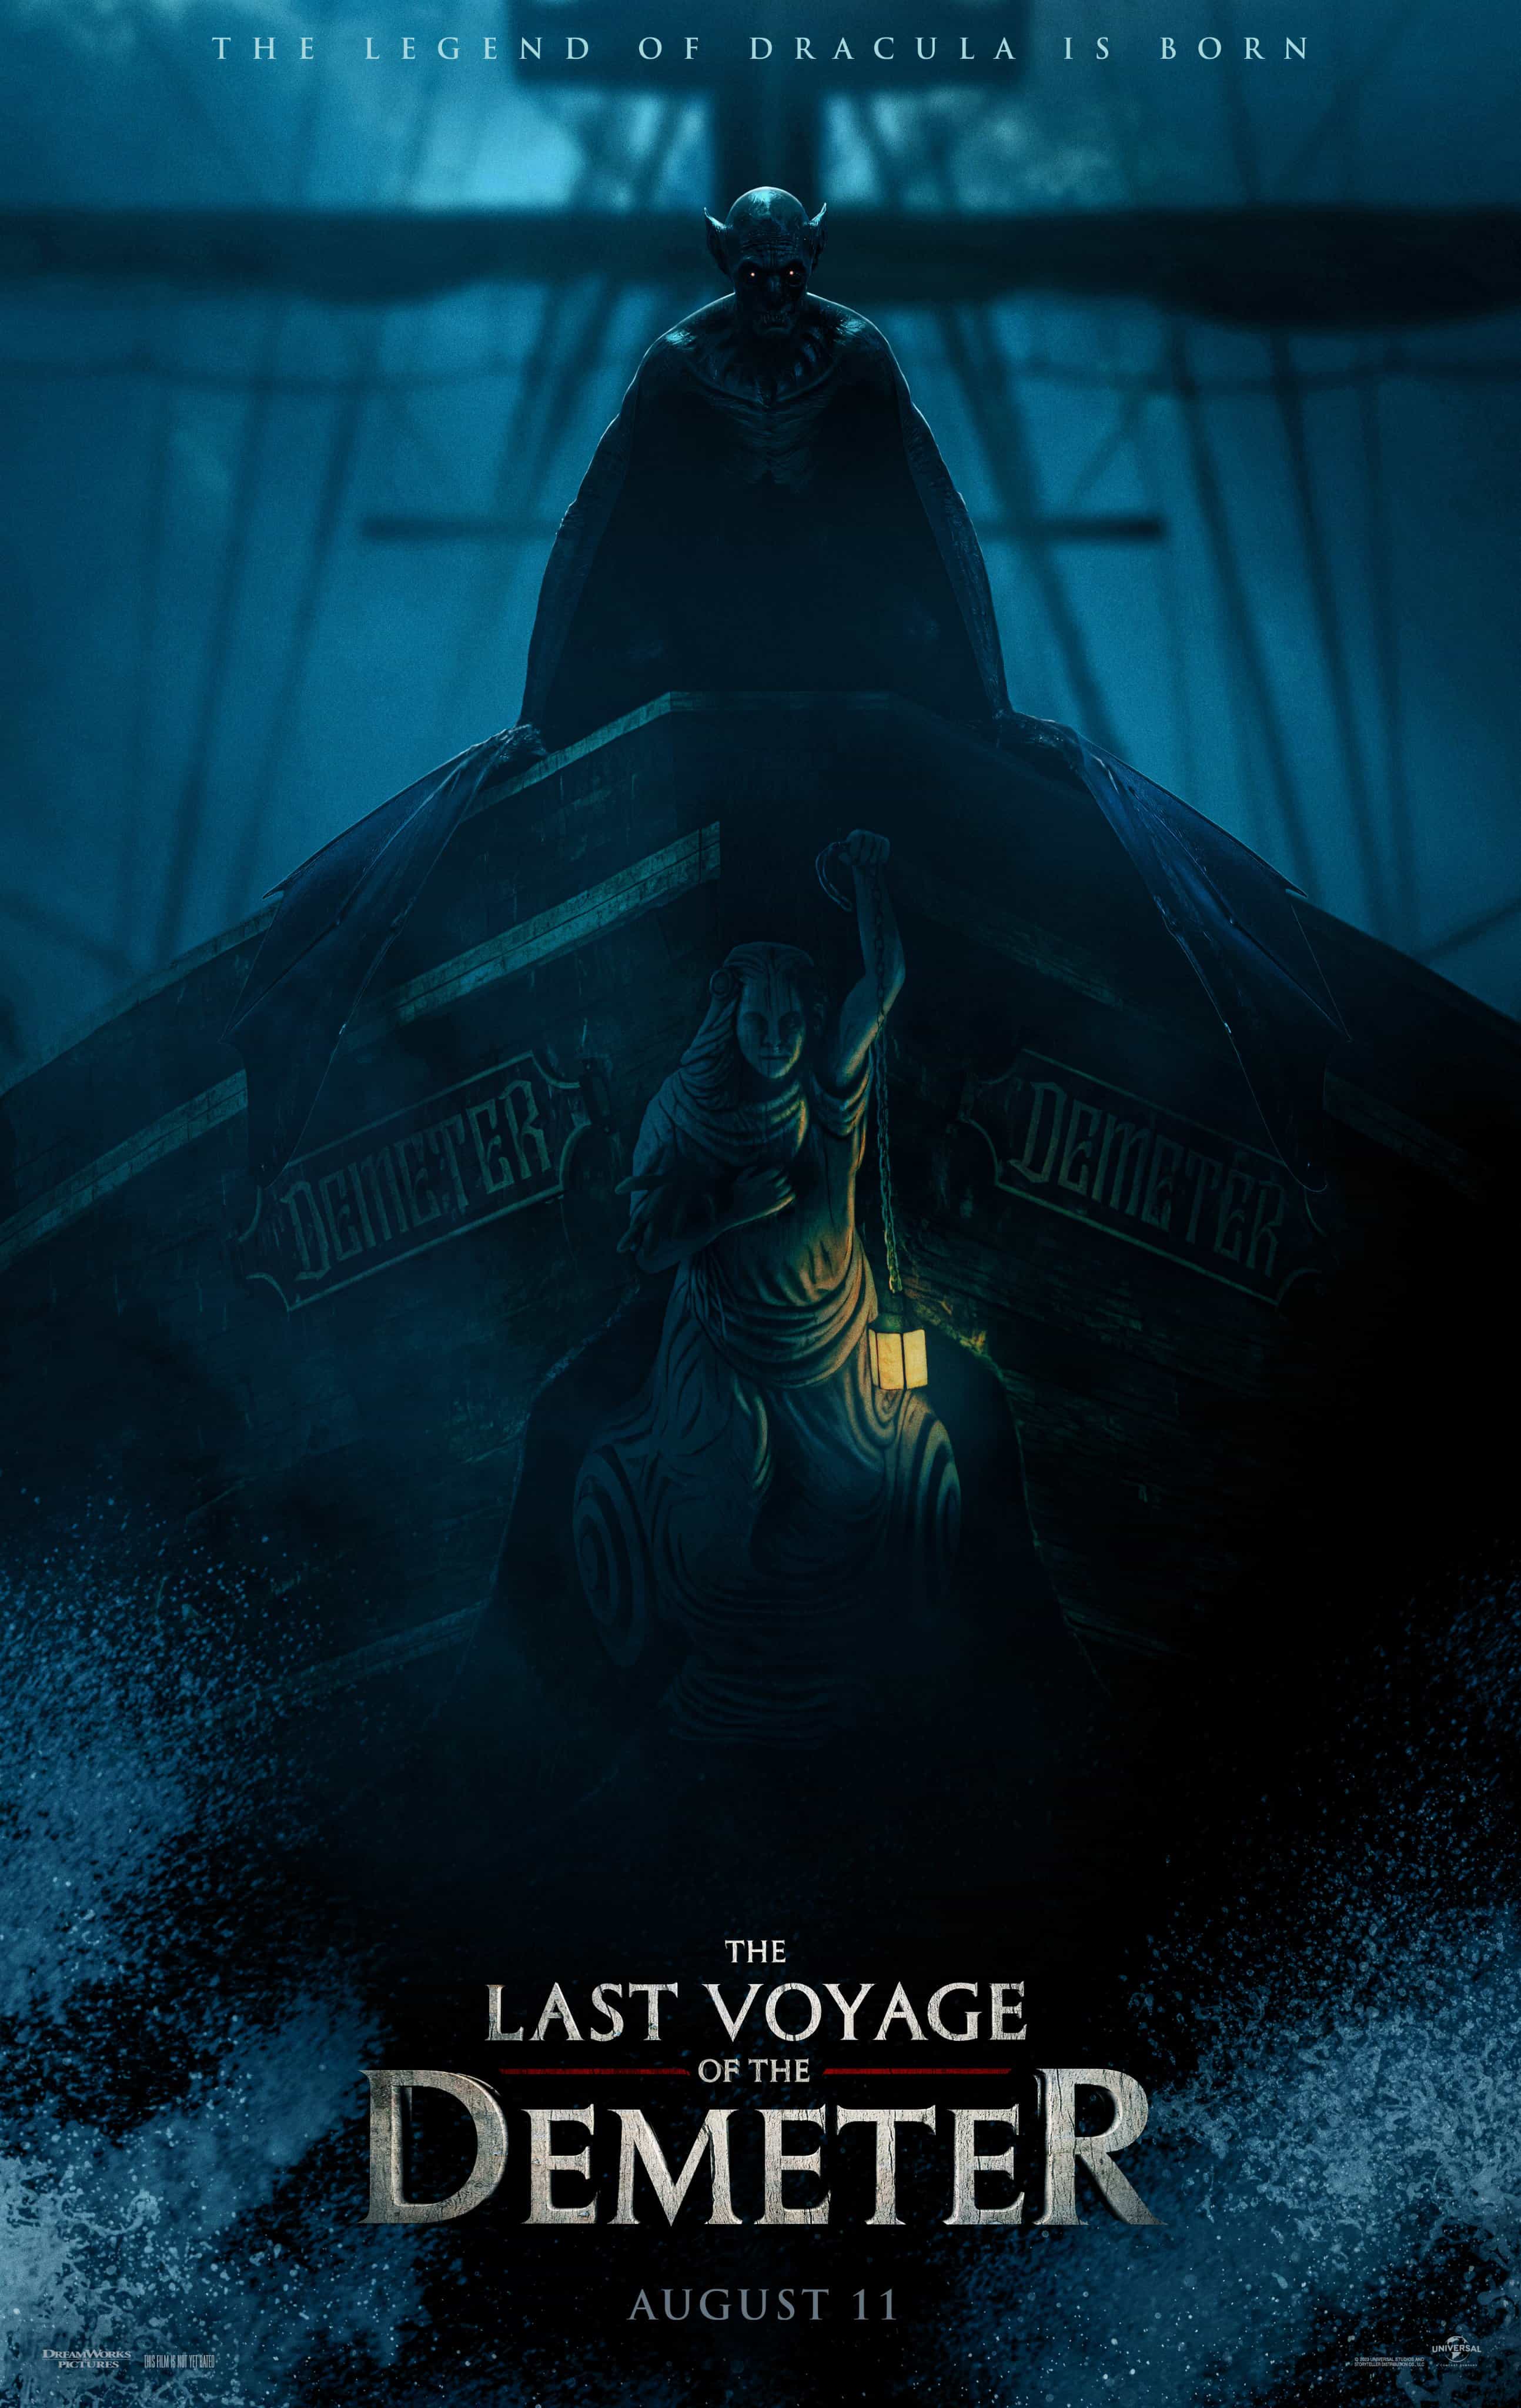 New poster has been released for The Last Voyage of the Demeter which stars Liam Cunningham and Aisling Franciosi - movie UK release date 11th August 2023 #thelastvoyageofdemeter